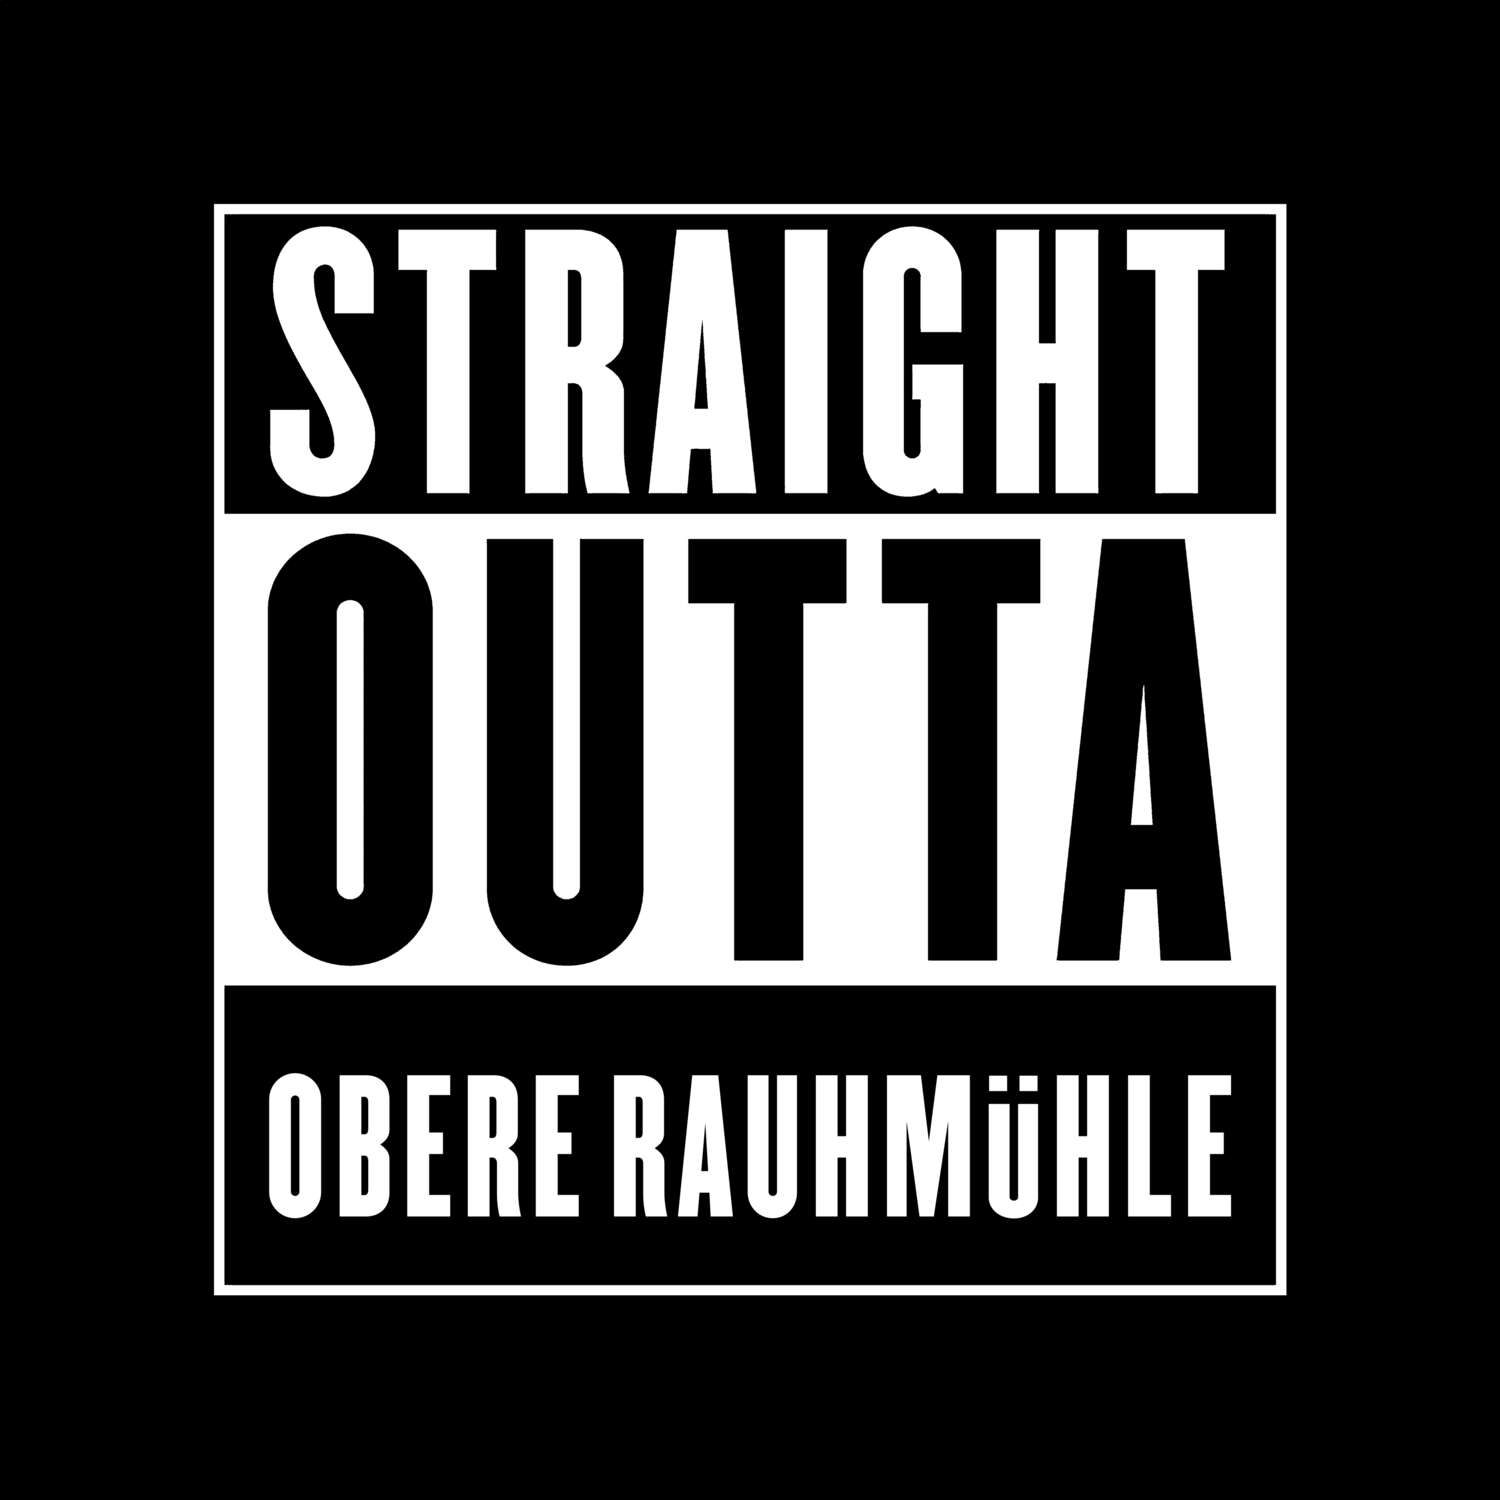 Obere Rauhmühle T-Shirt »Straight Outta«